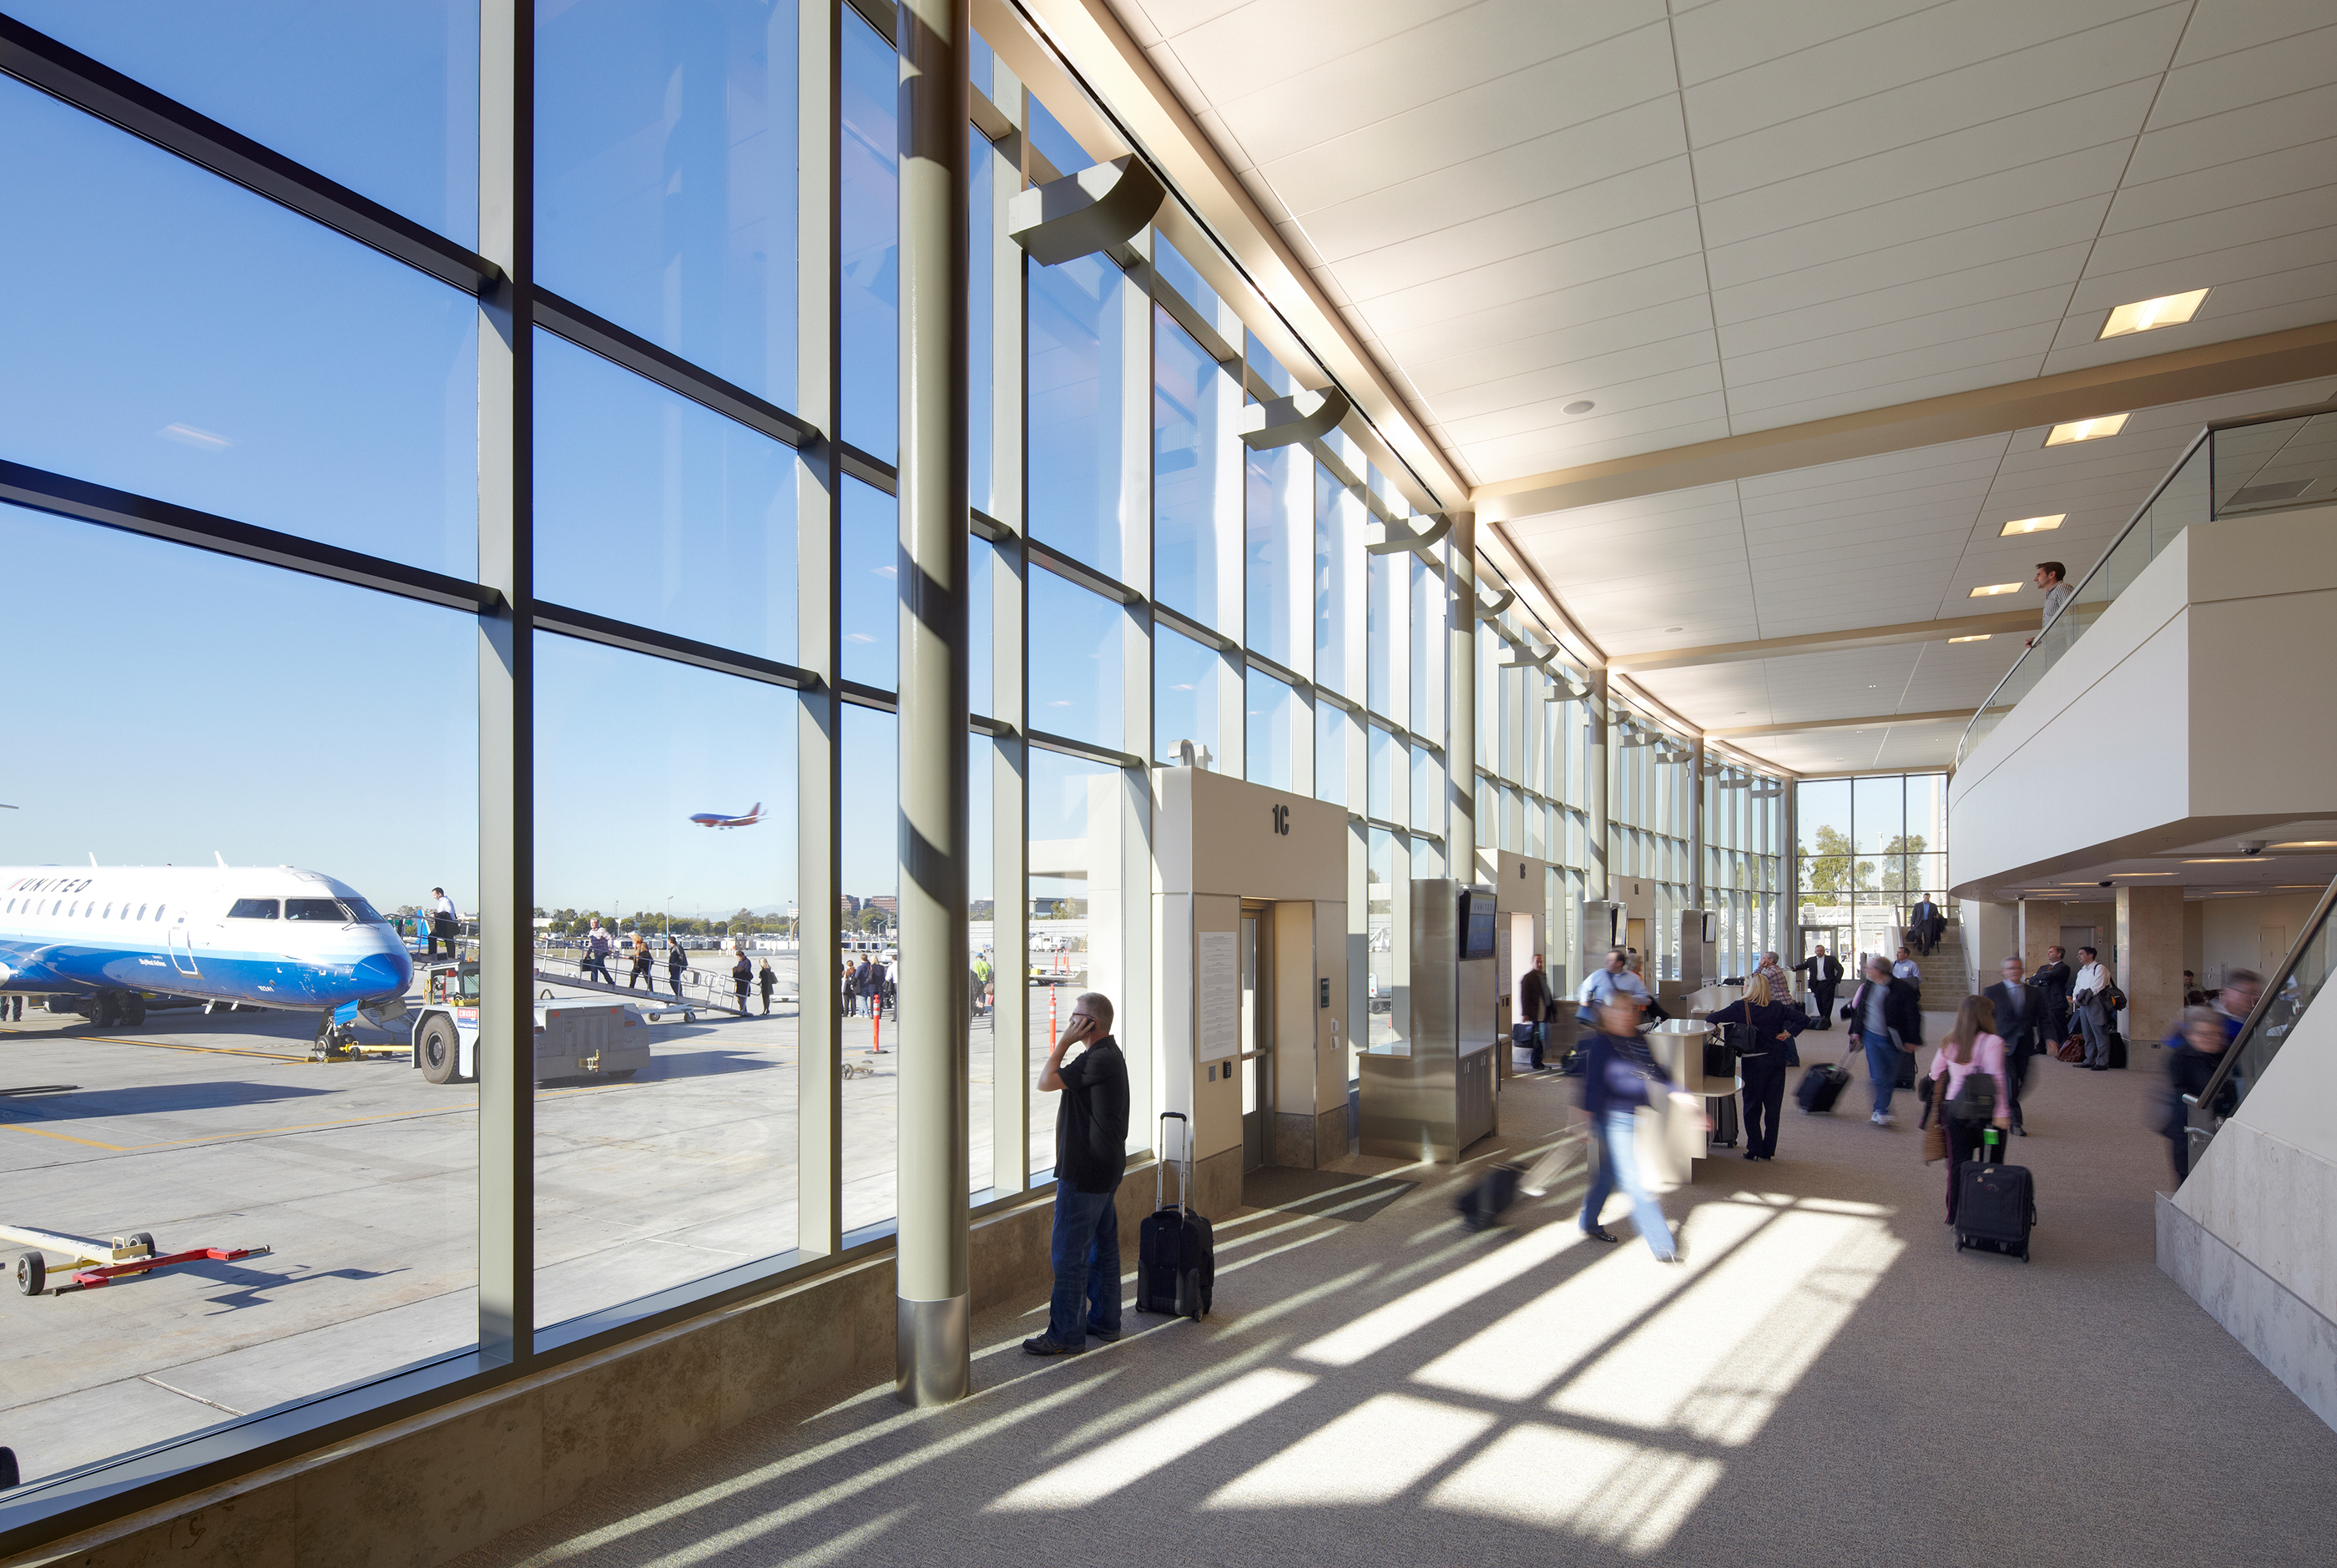 These Are the 15 Best Airports in the U.S., Ranked